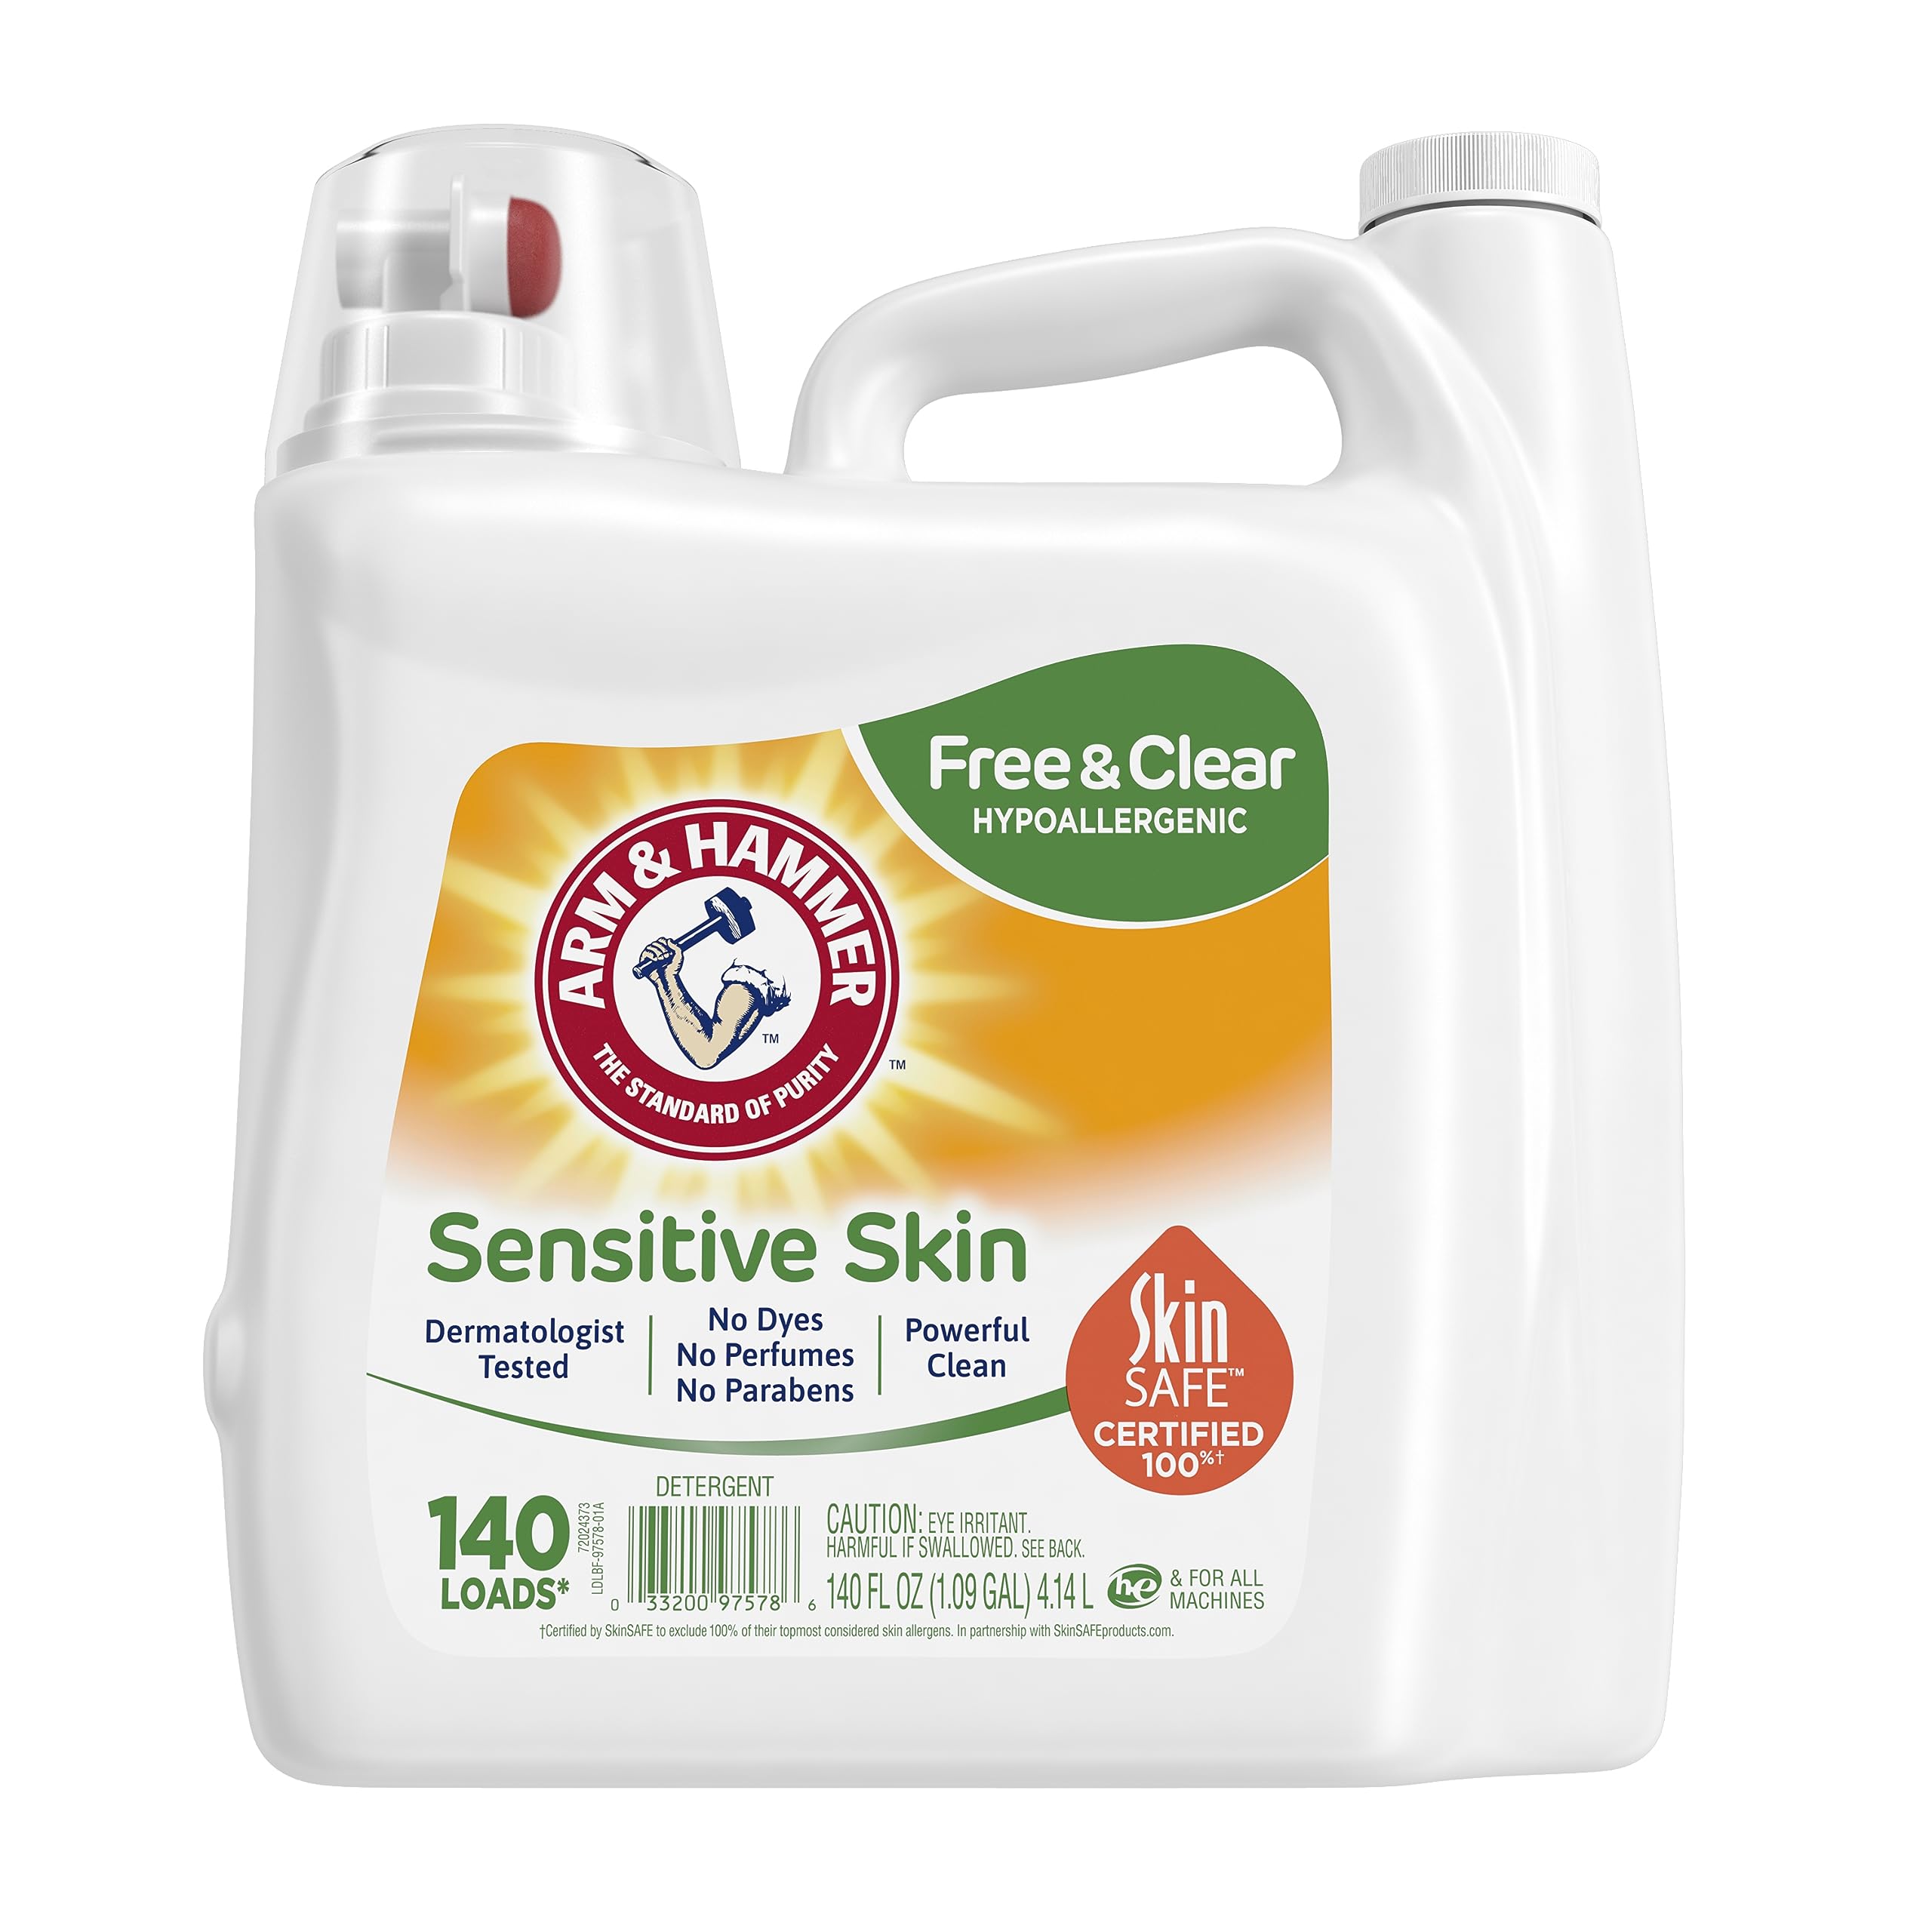 Arm & Hammer Sensitive Skin Free & Clear, 140 Loads Liquid Laundry Detergent, 140 Fl oz Perfume & Dye Free 140 Fl Oz (Pack of 1), List Price is $13.49, Now Only $7.92